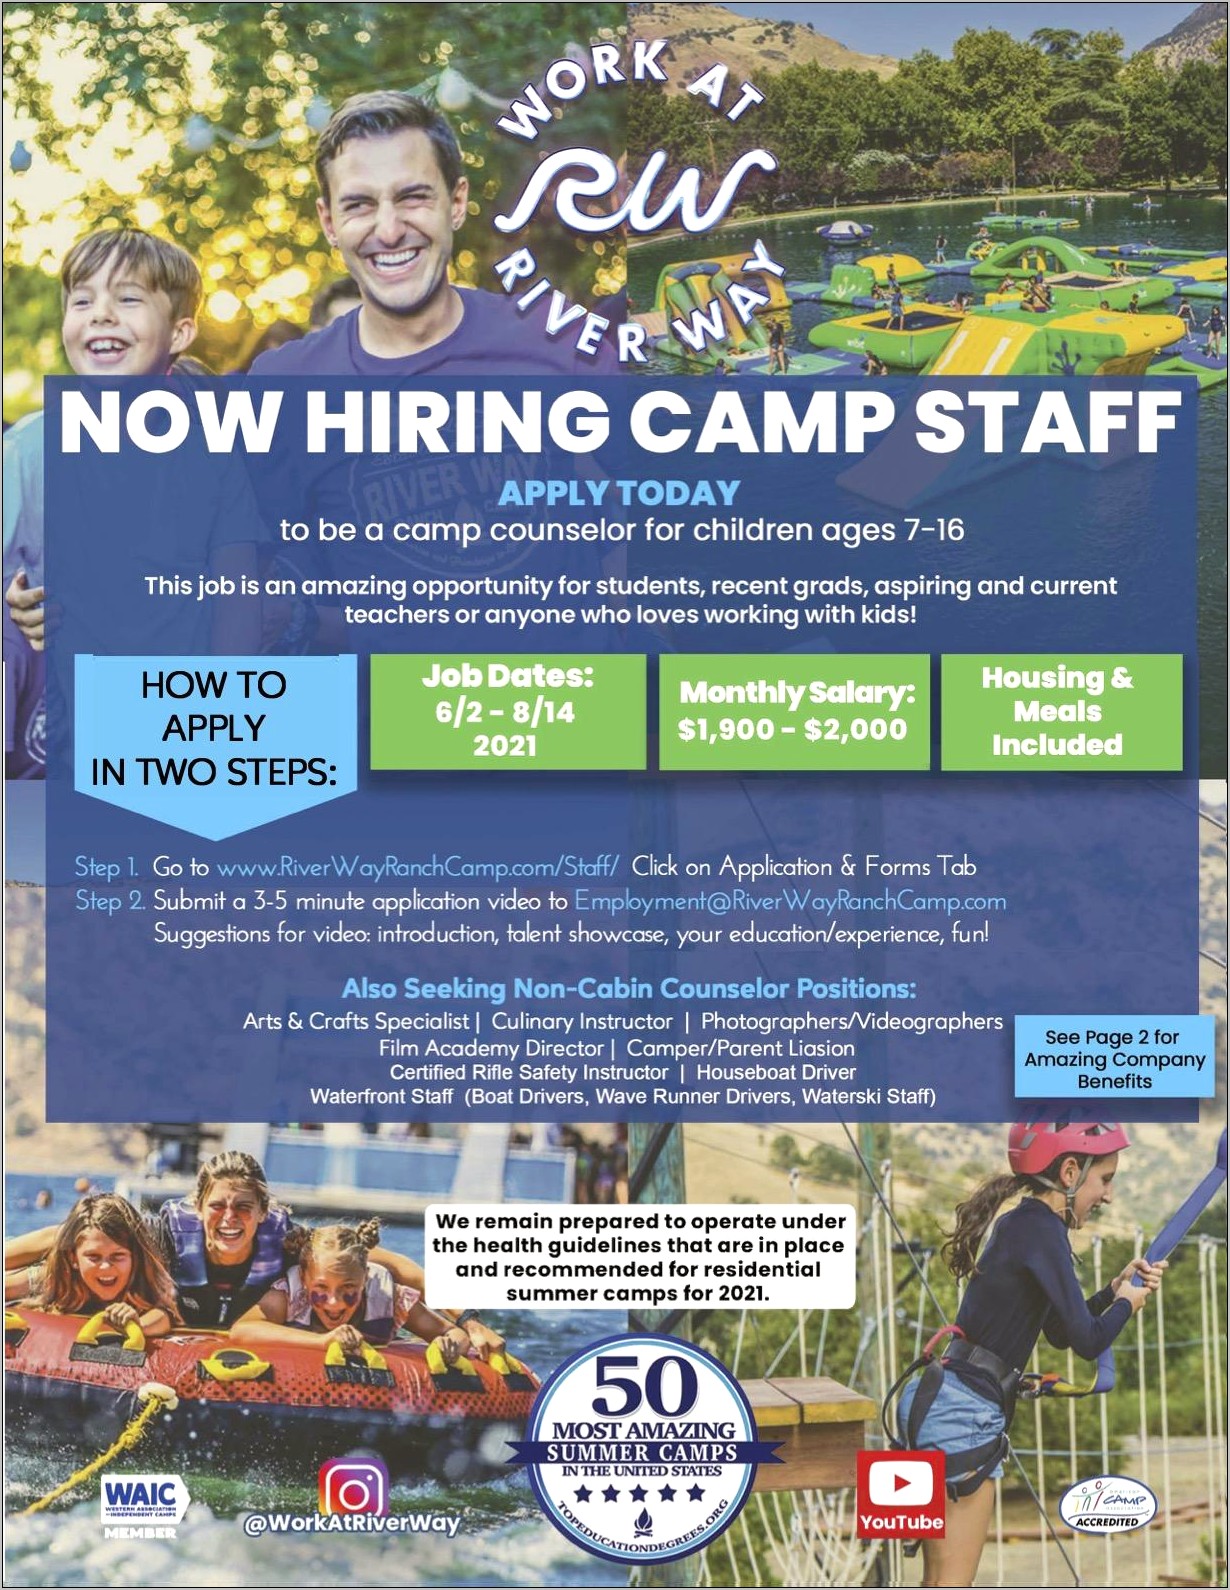 Resume Skills For Summer Camp Counselor